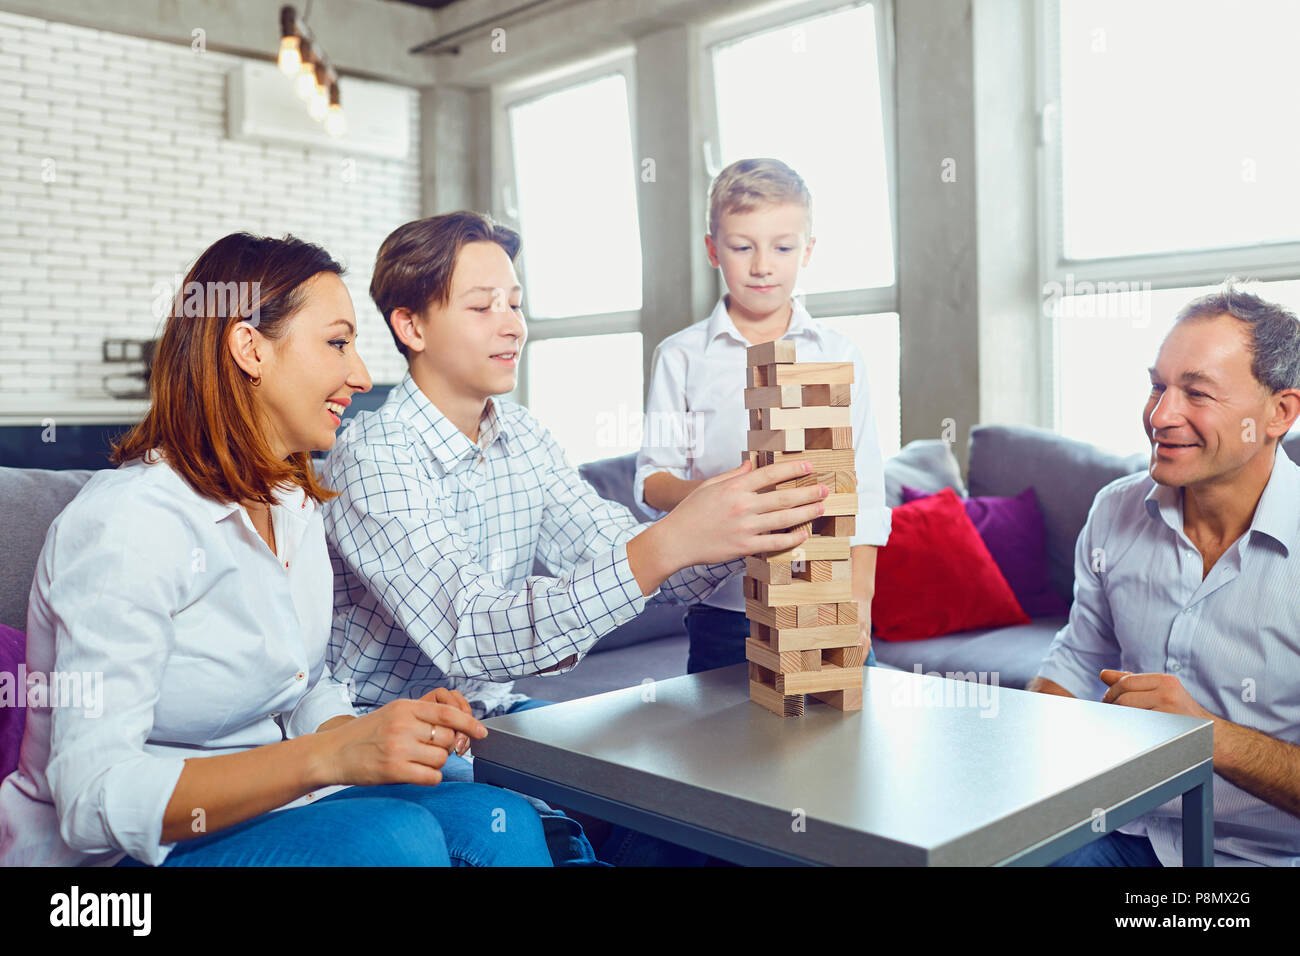 The family plays board games inside the room. Stock Photo